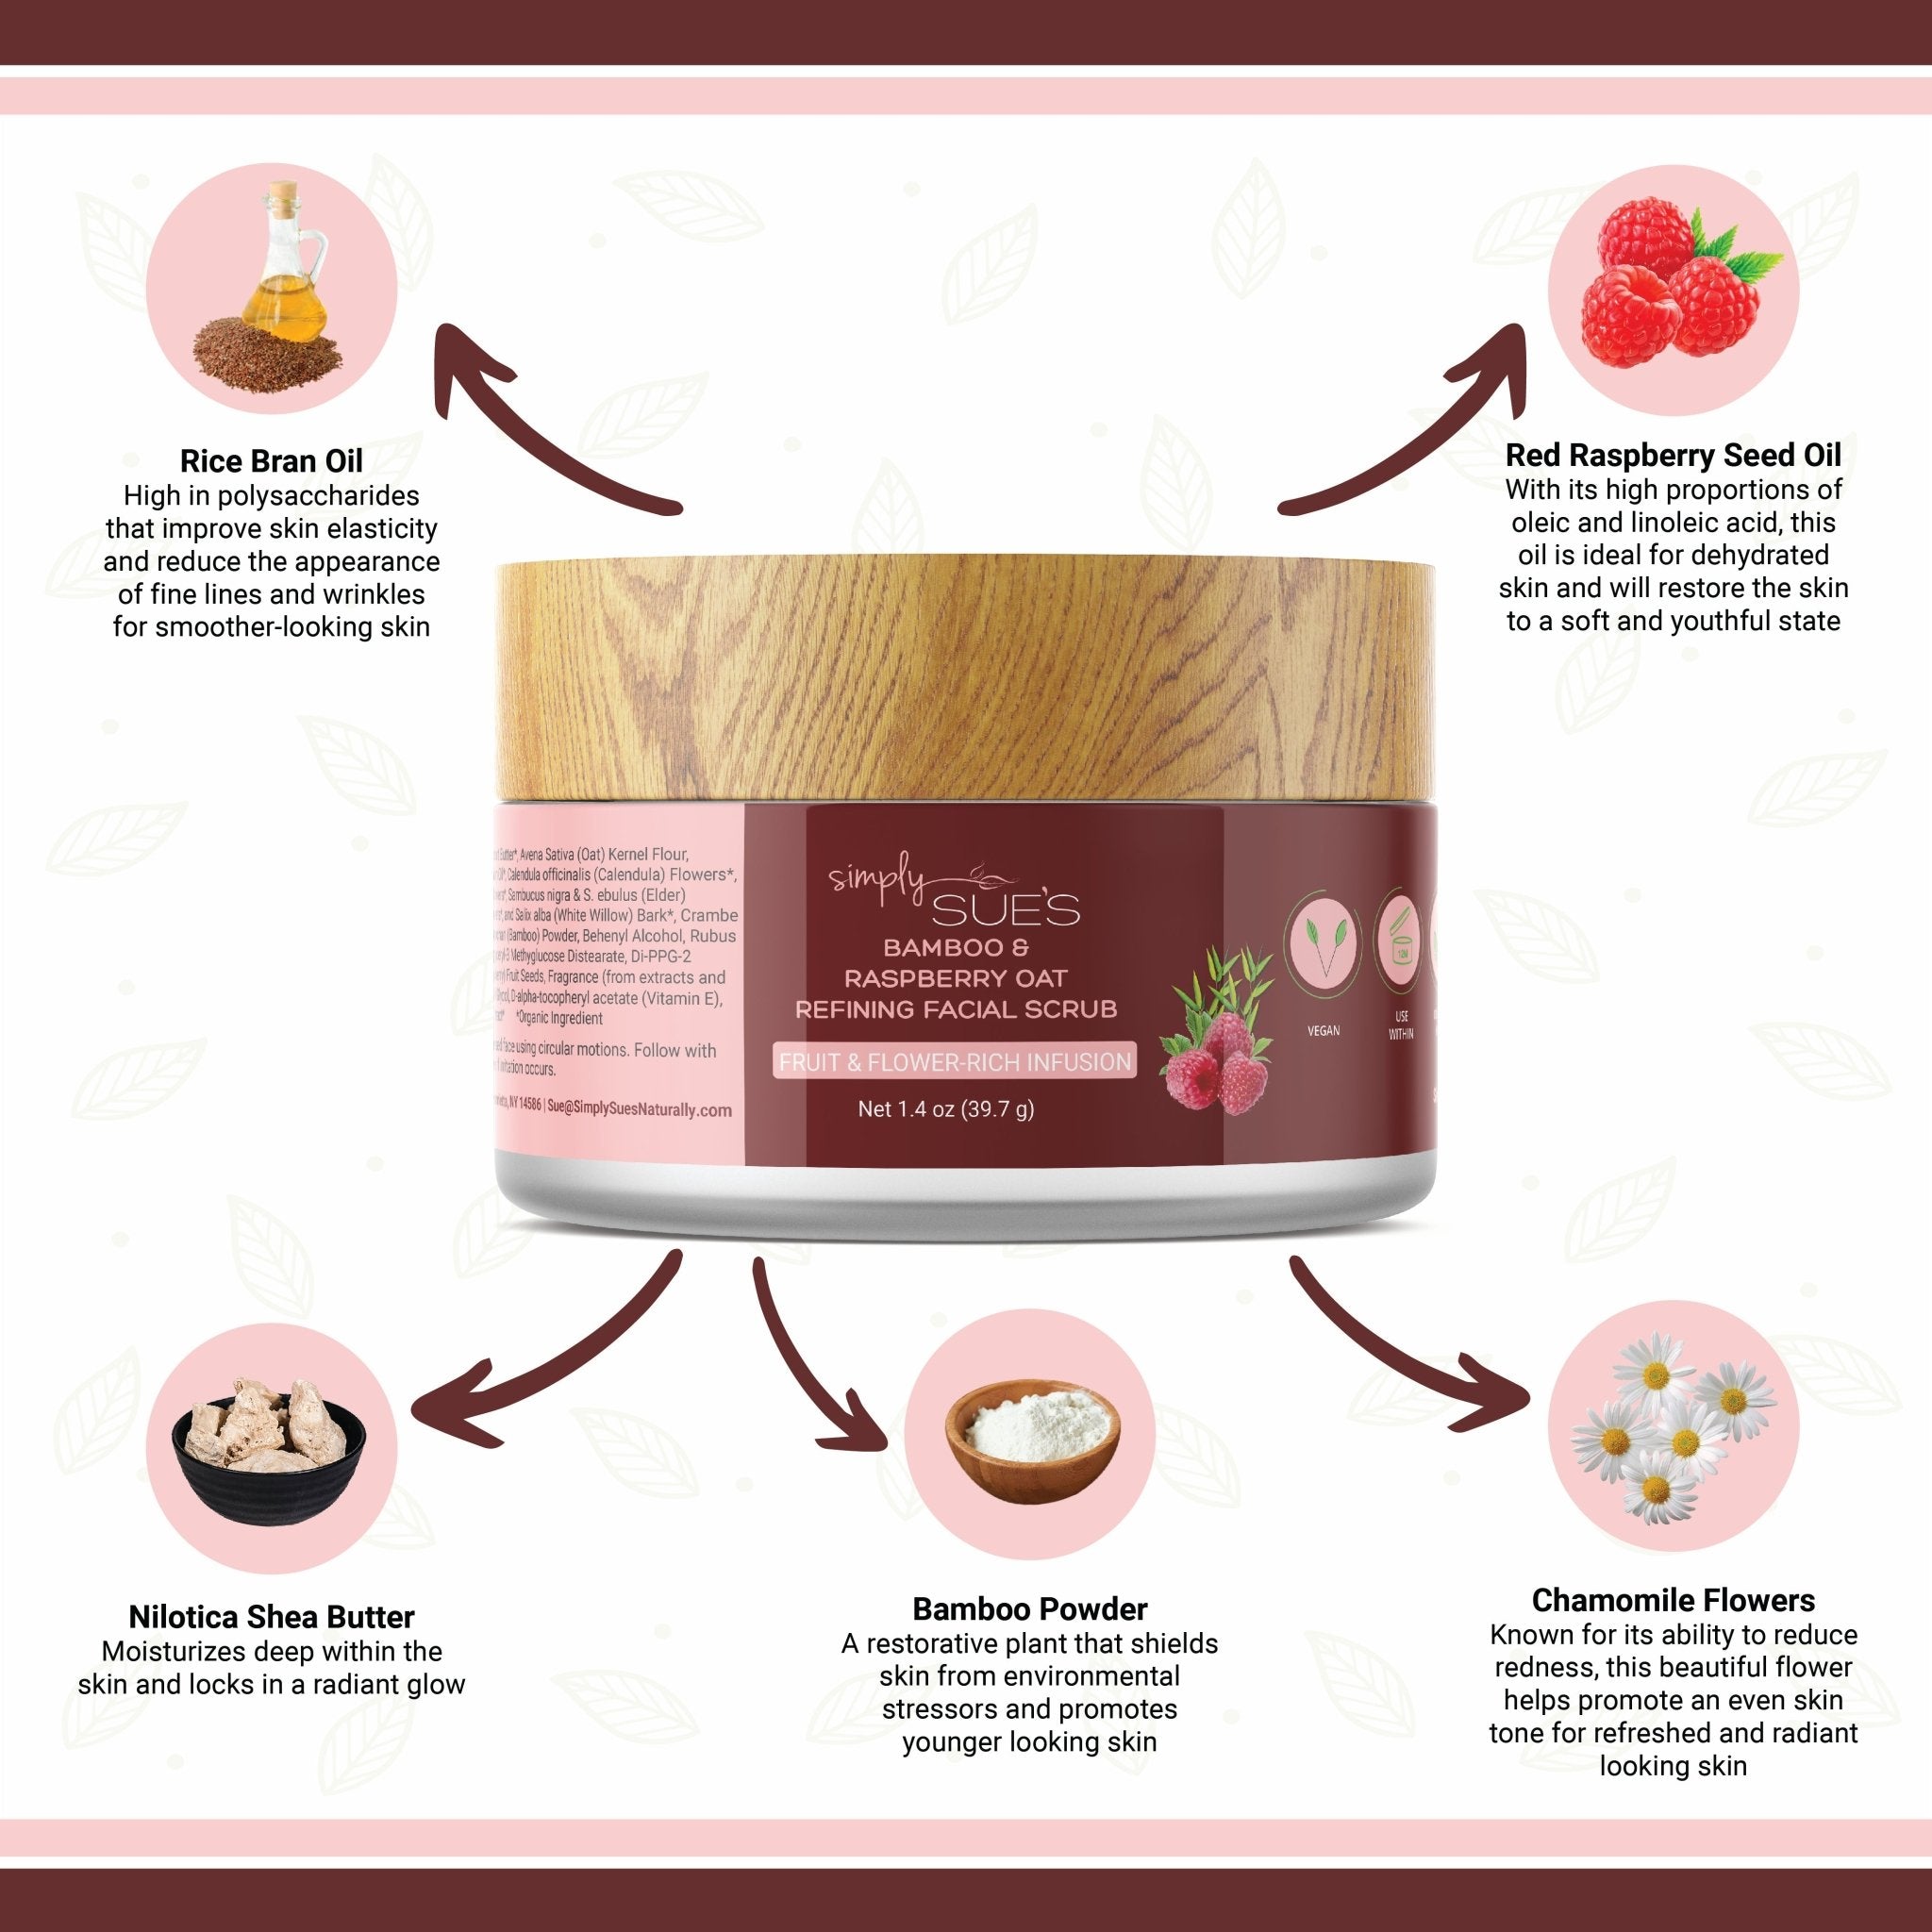 A graphic showing some of the ingredients in the scrub and what the ingredients do for the skin